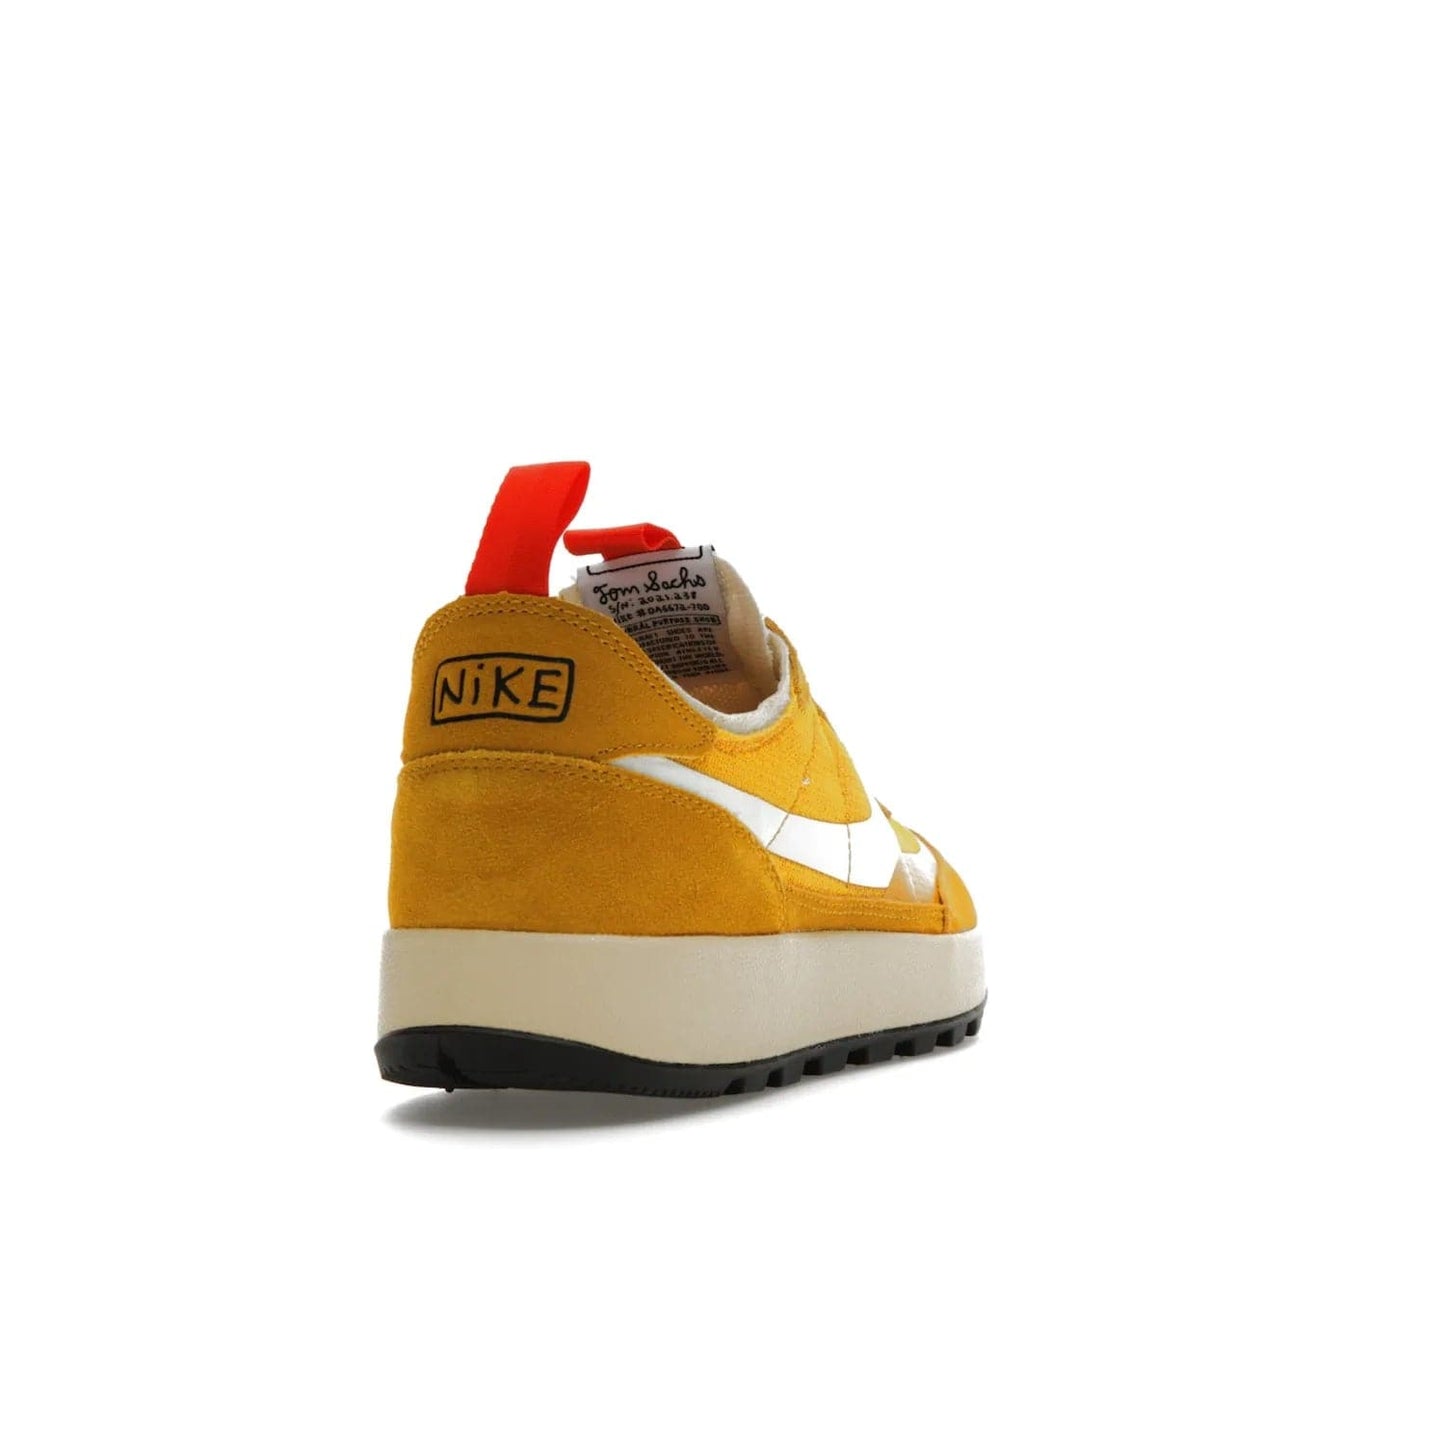 NikeCraft General Purpose Shoe Tom Sachs Archive Dark Sulfur - Image 30 - Only at www.BallersClubKickz.com - Collab between Nike & Tom Sachs. The NikeCraft General Purpose Shoe features dark sulfur mesh upper, suede overlays, contrasting white Swoosh and orange tabs. EVA cushioning & black waffle-traction rubber outsole ensures performance. Stylish & perfect for any occasion, the shoe released September 2, 2022.